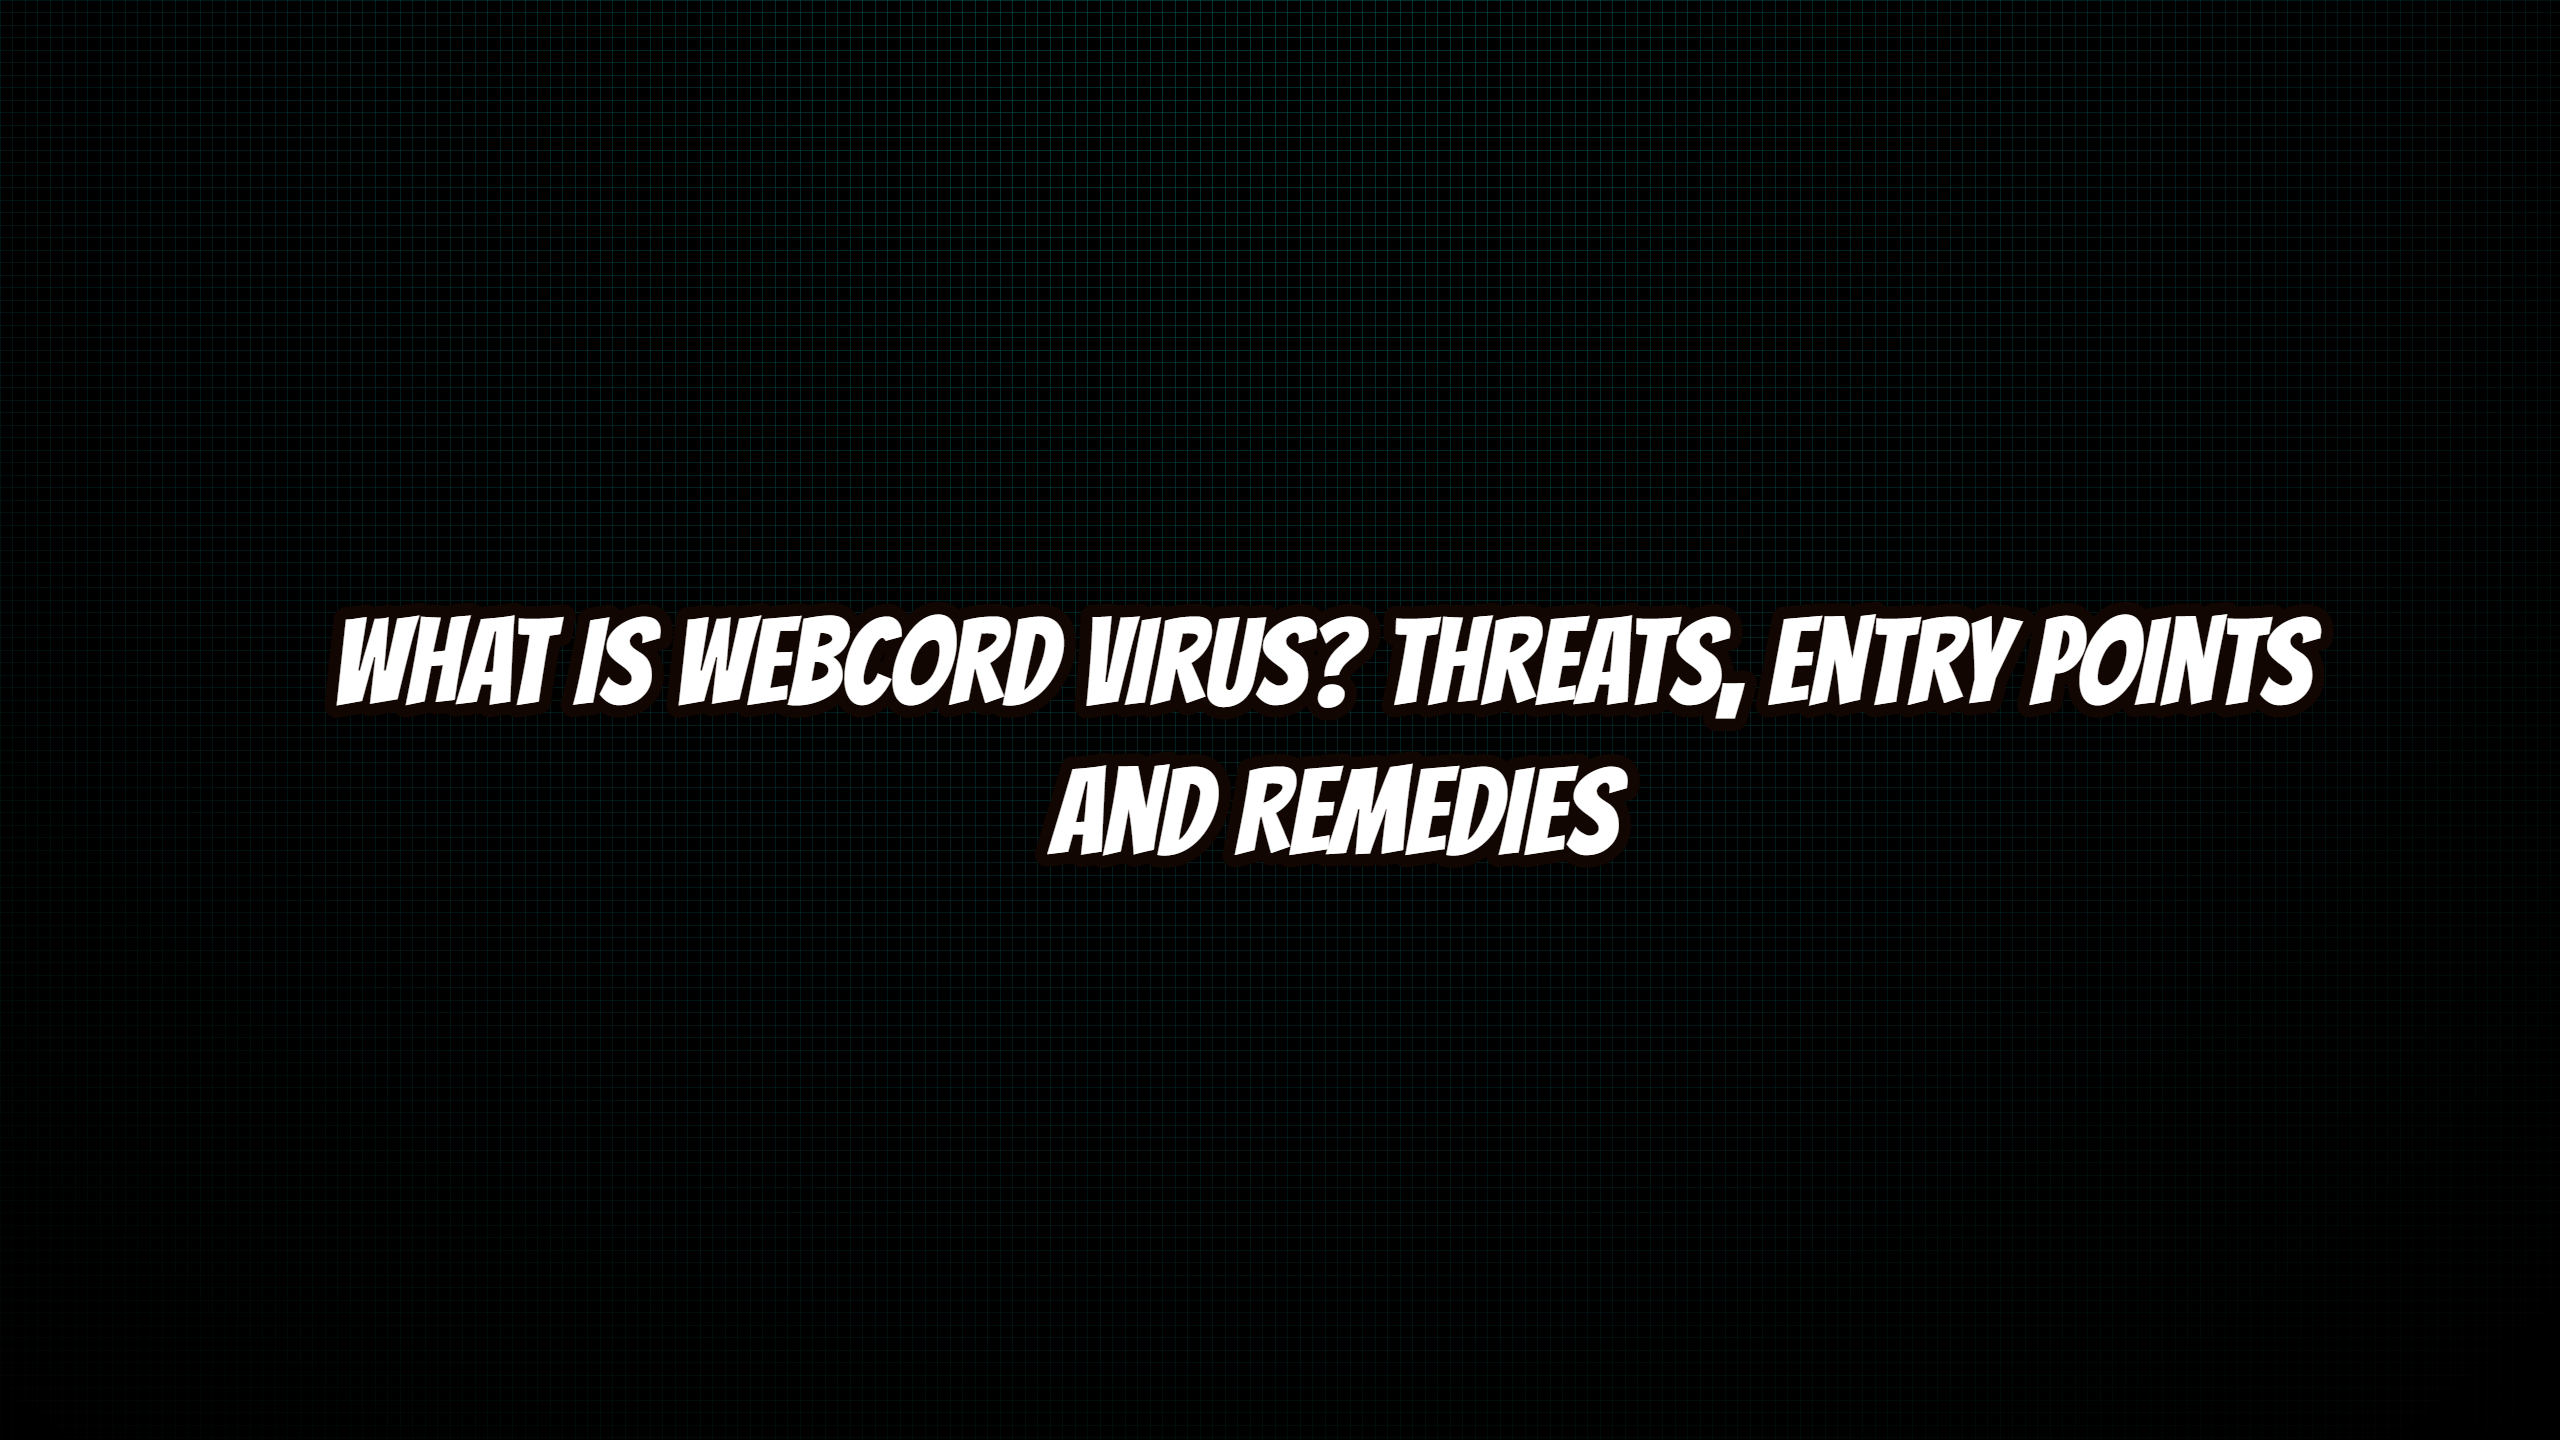 What is webcord virus? Threats, Entry Points and Remedies